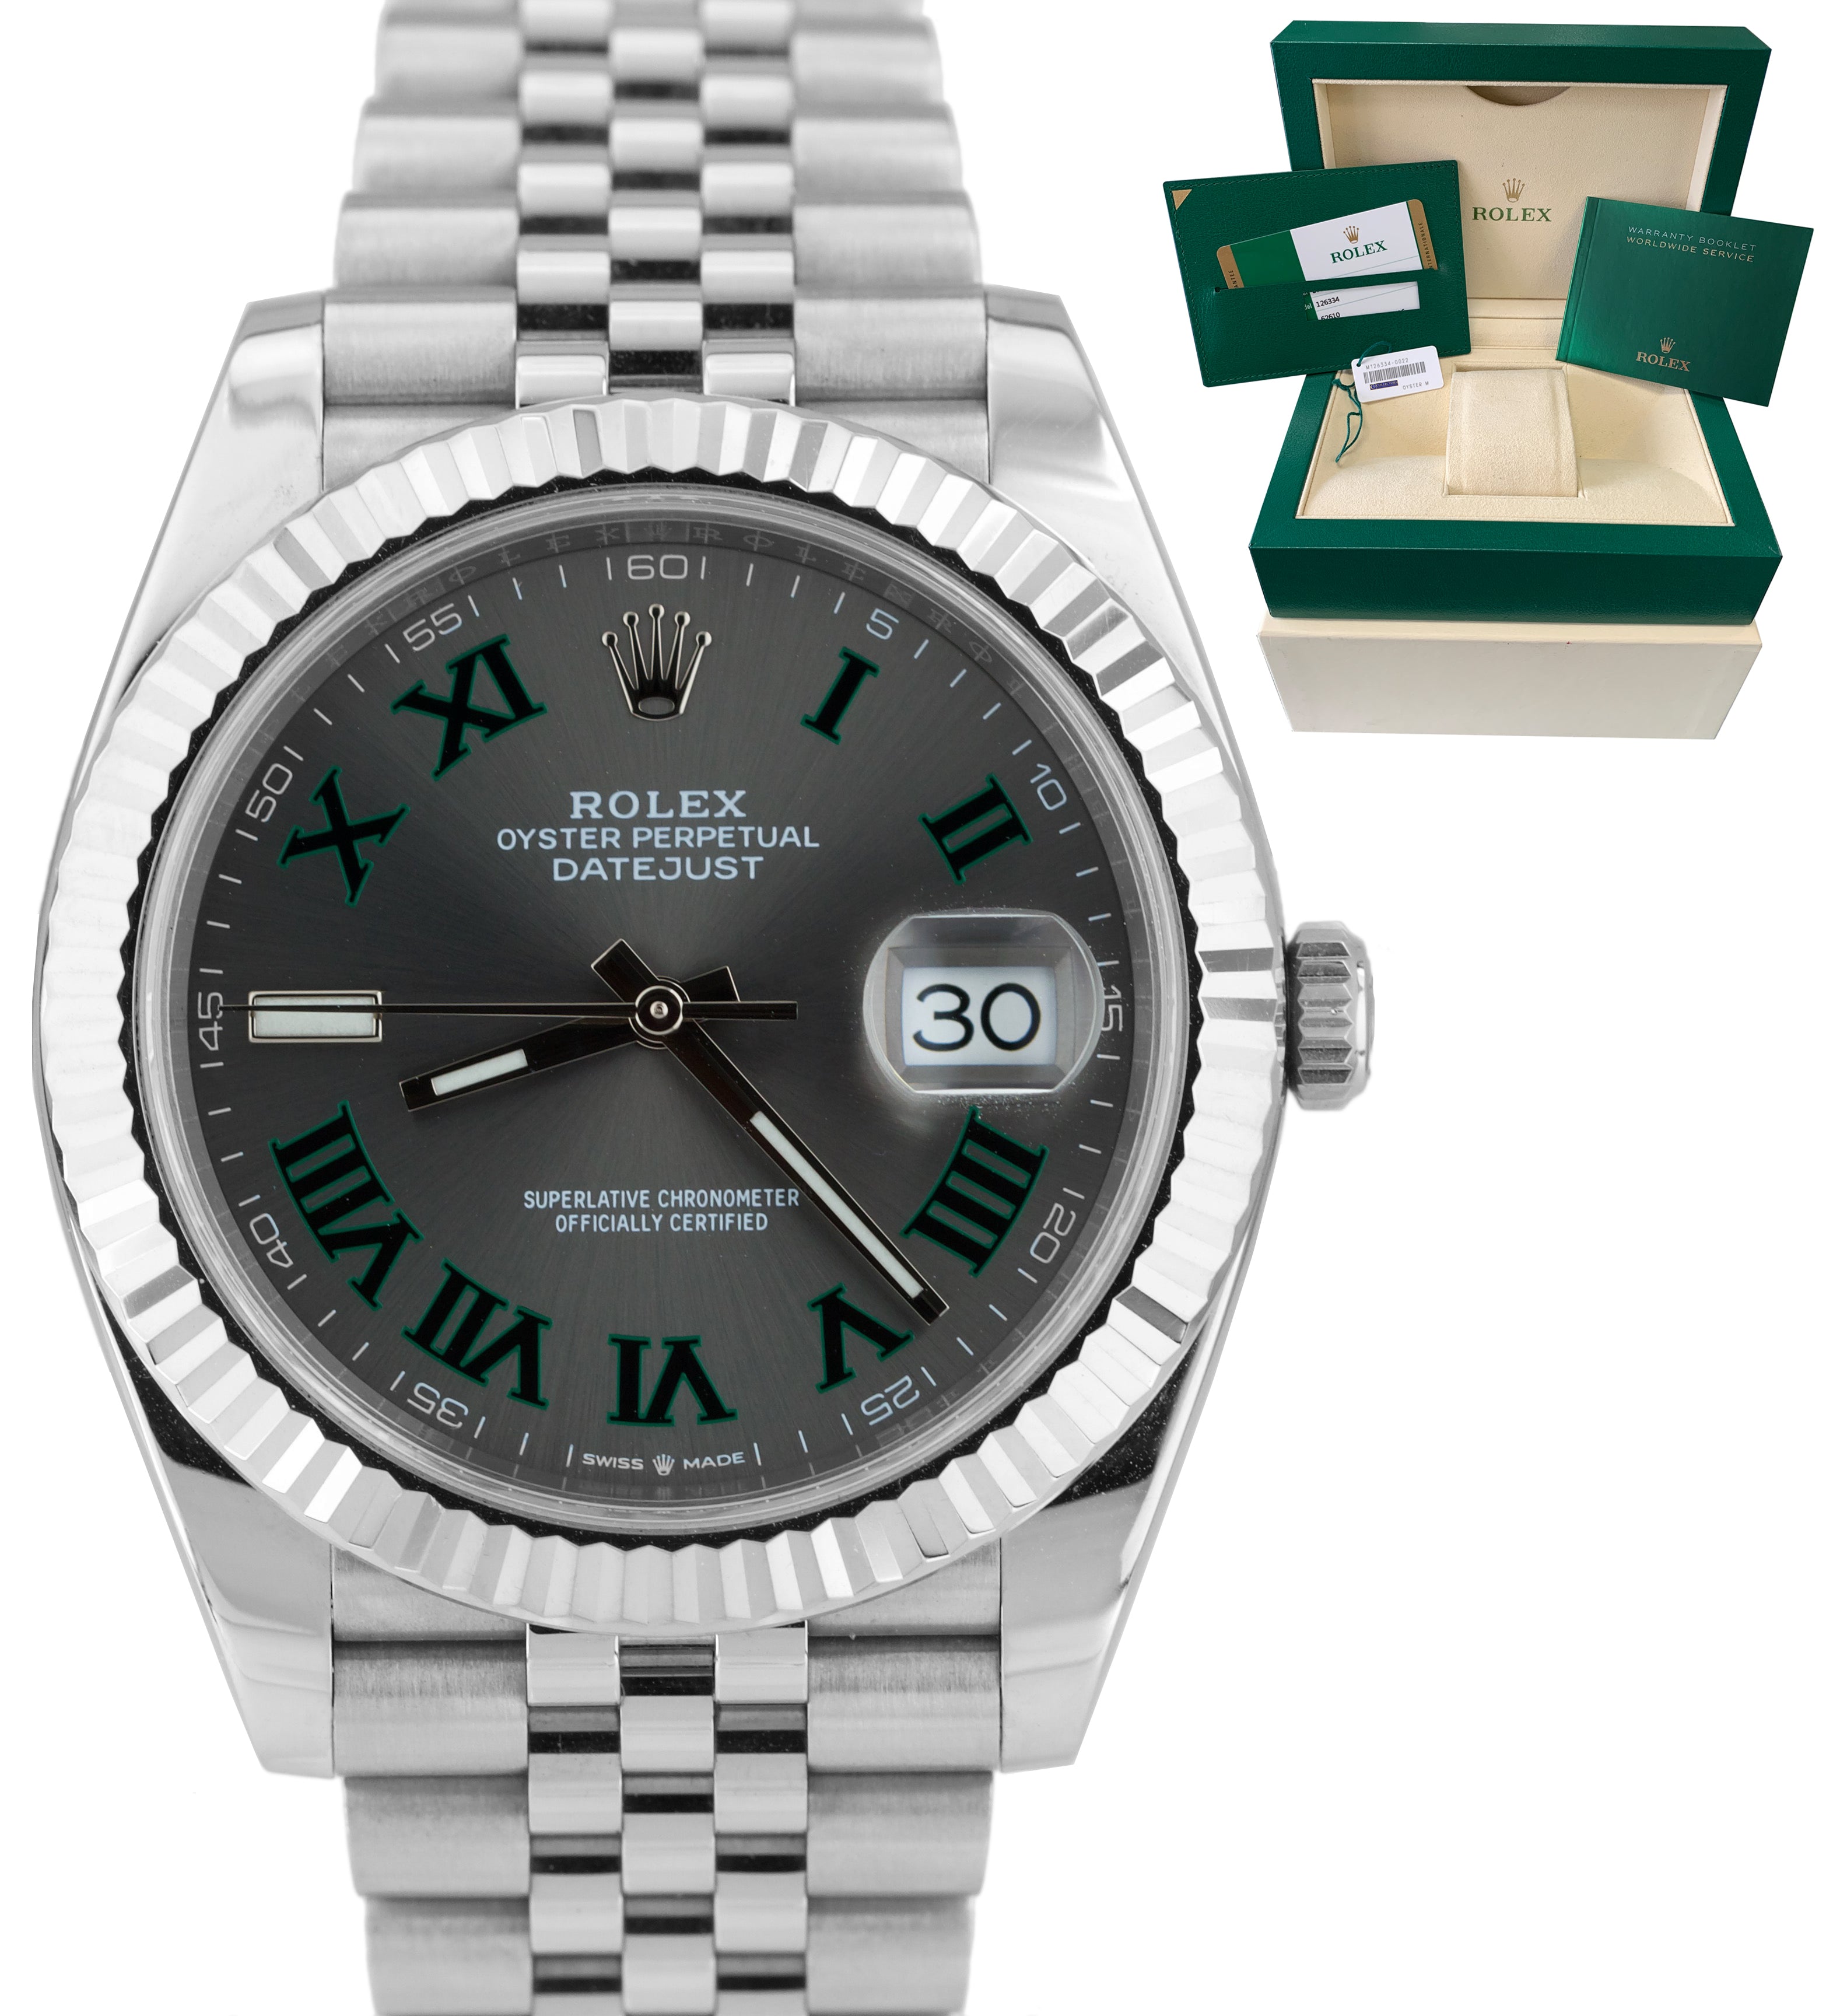 Rolex Datejust 41 Yellow Gold & Stainless Steel Slate/Green Roman